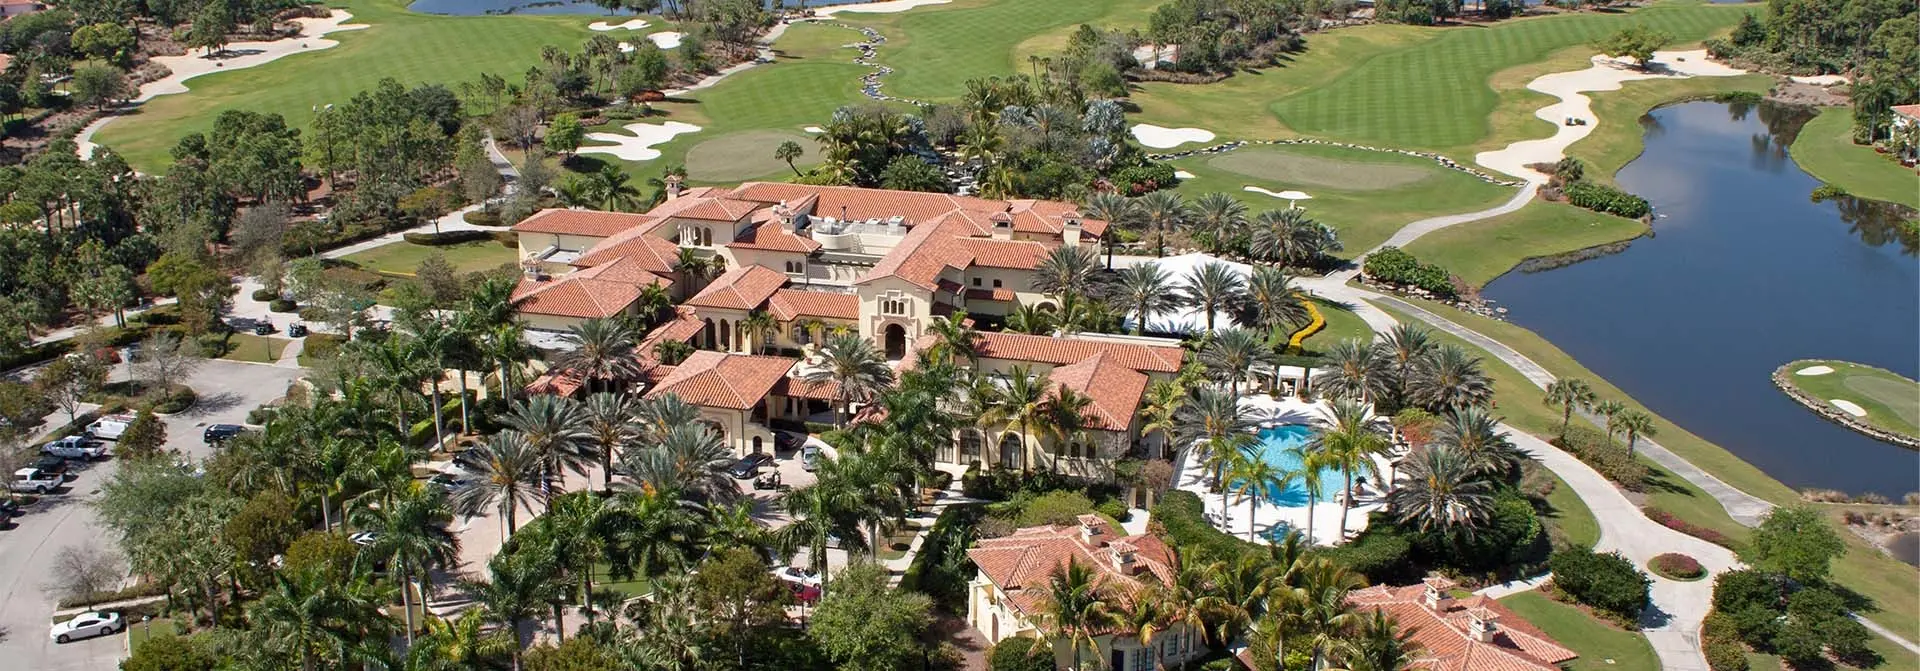 Old Palm Golf Club Homes for Sale | Old Palm Luxury Homes for Sale